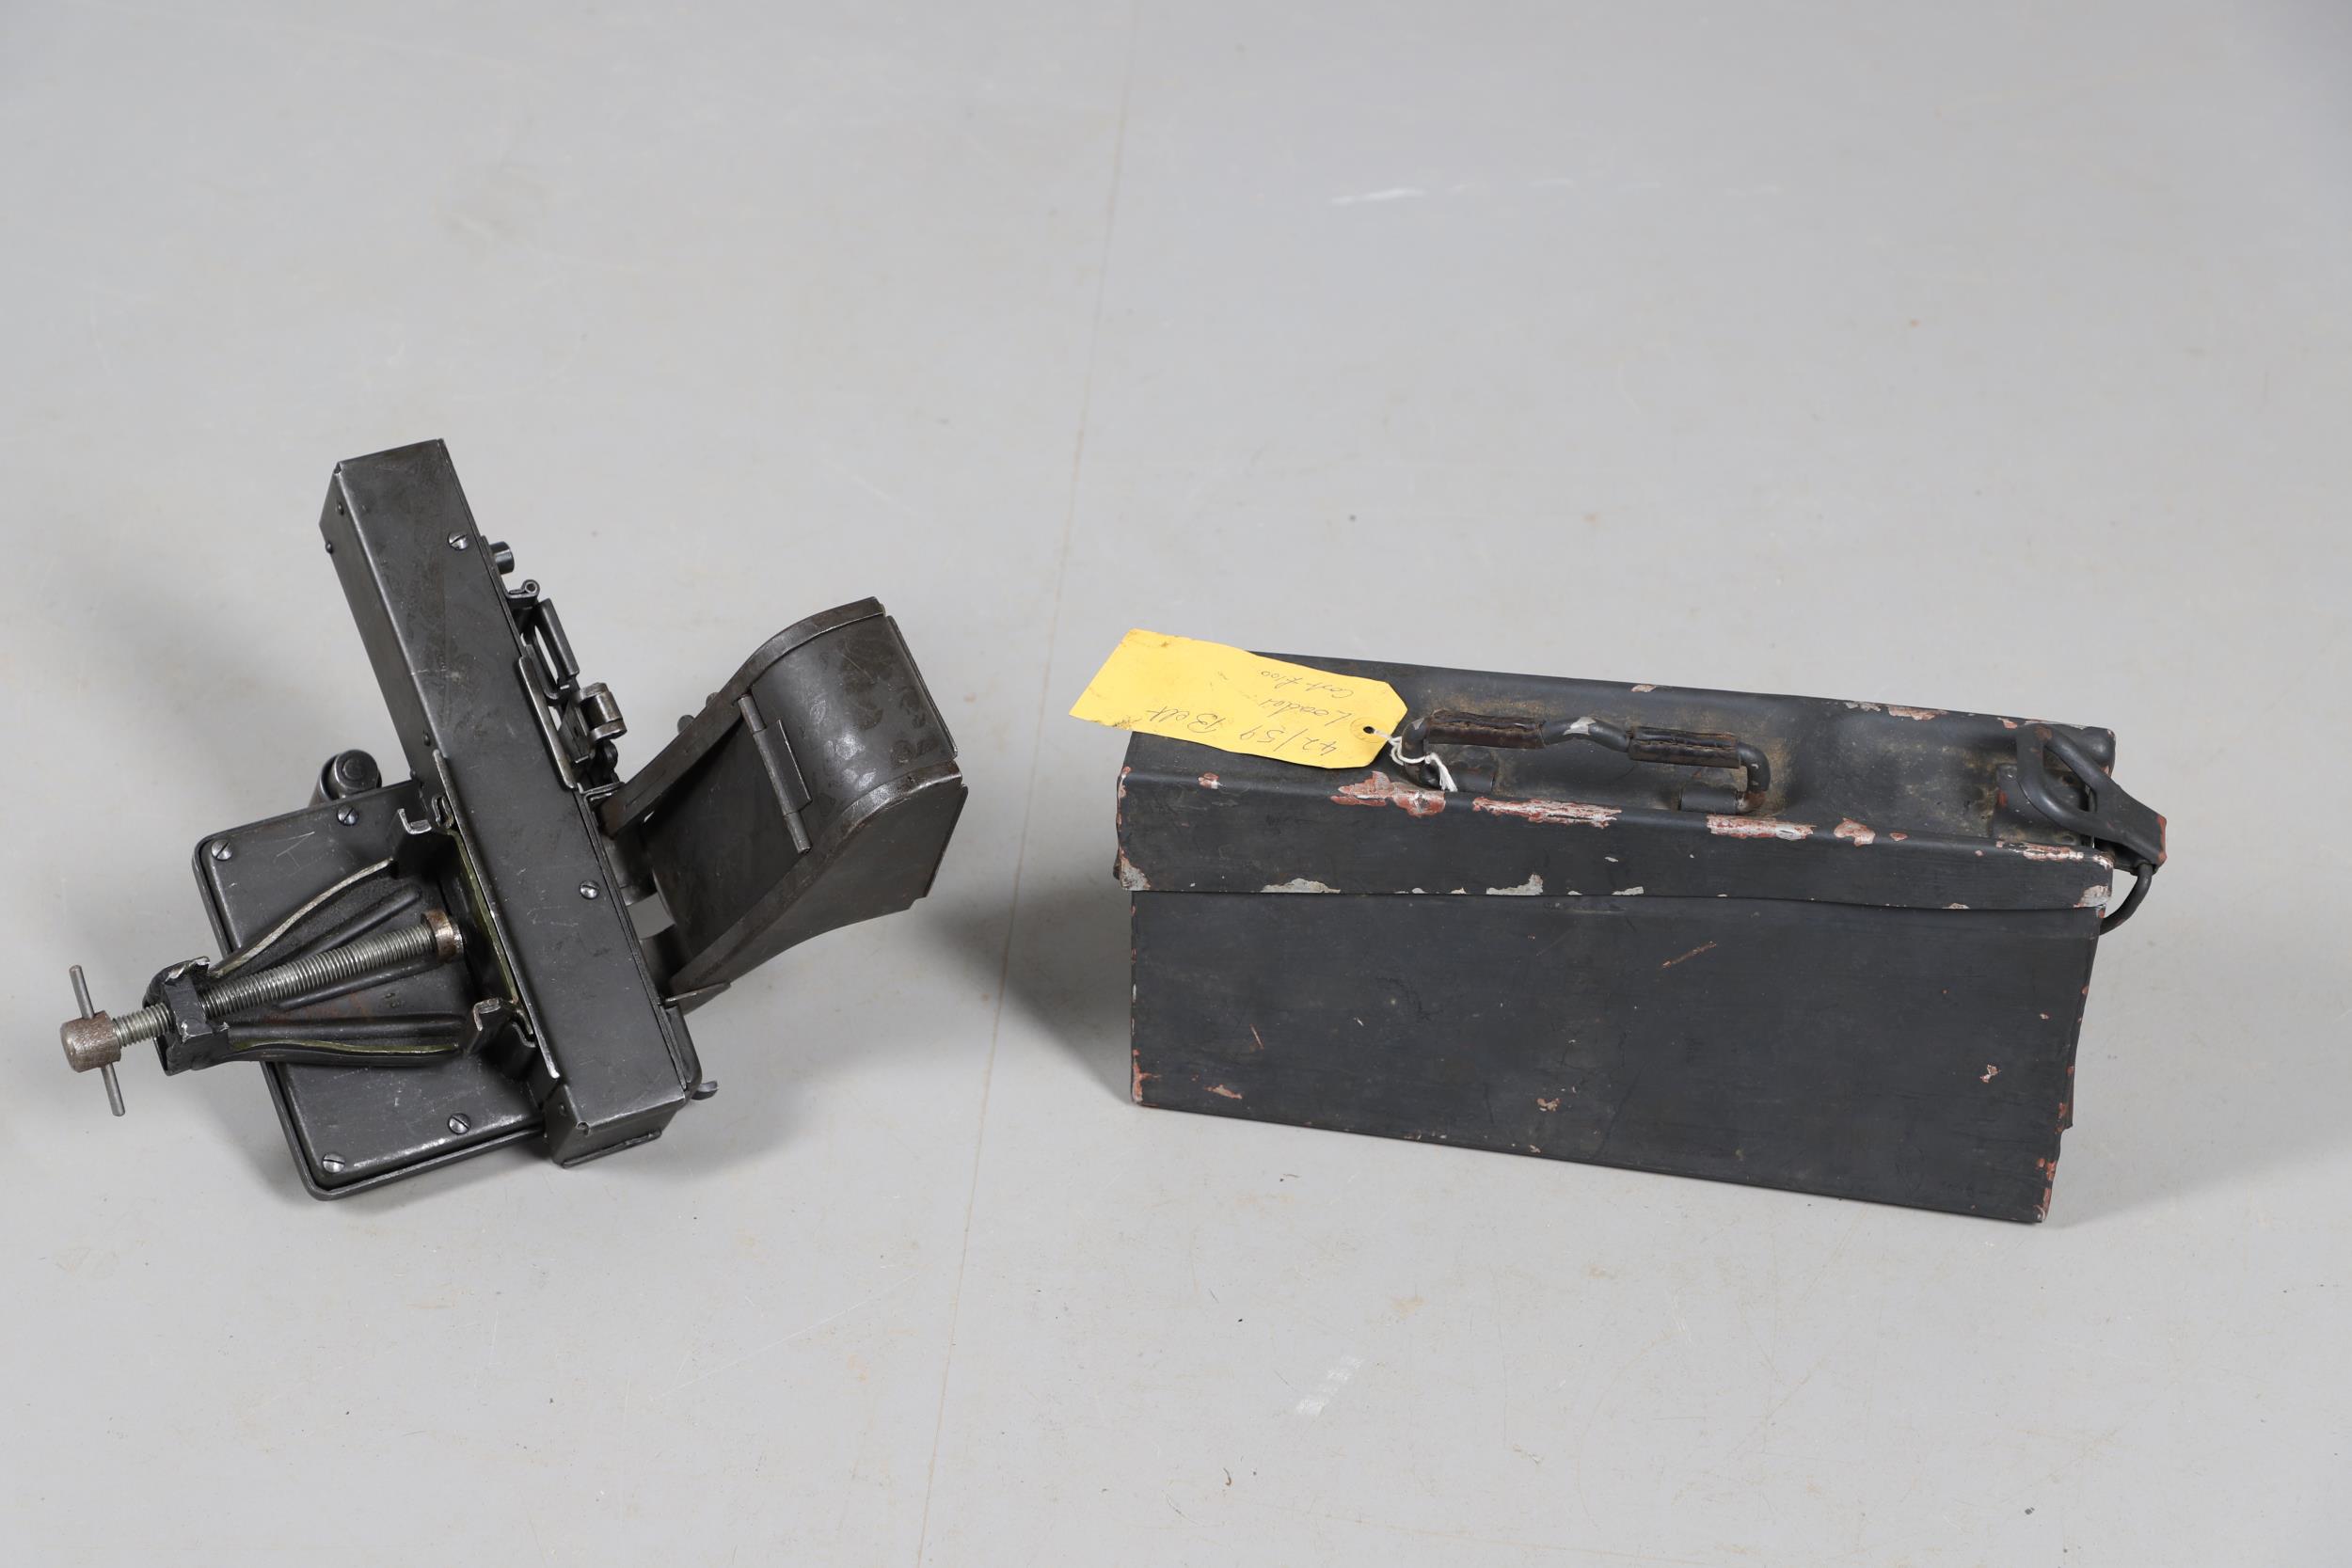 A 42/59 MACHINE GUN BELT LOADER AND ANOTHER SIMILAR. - Image 14 of 14